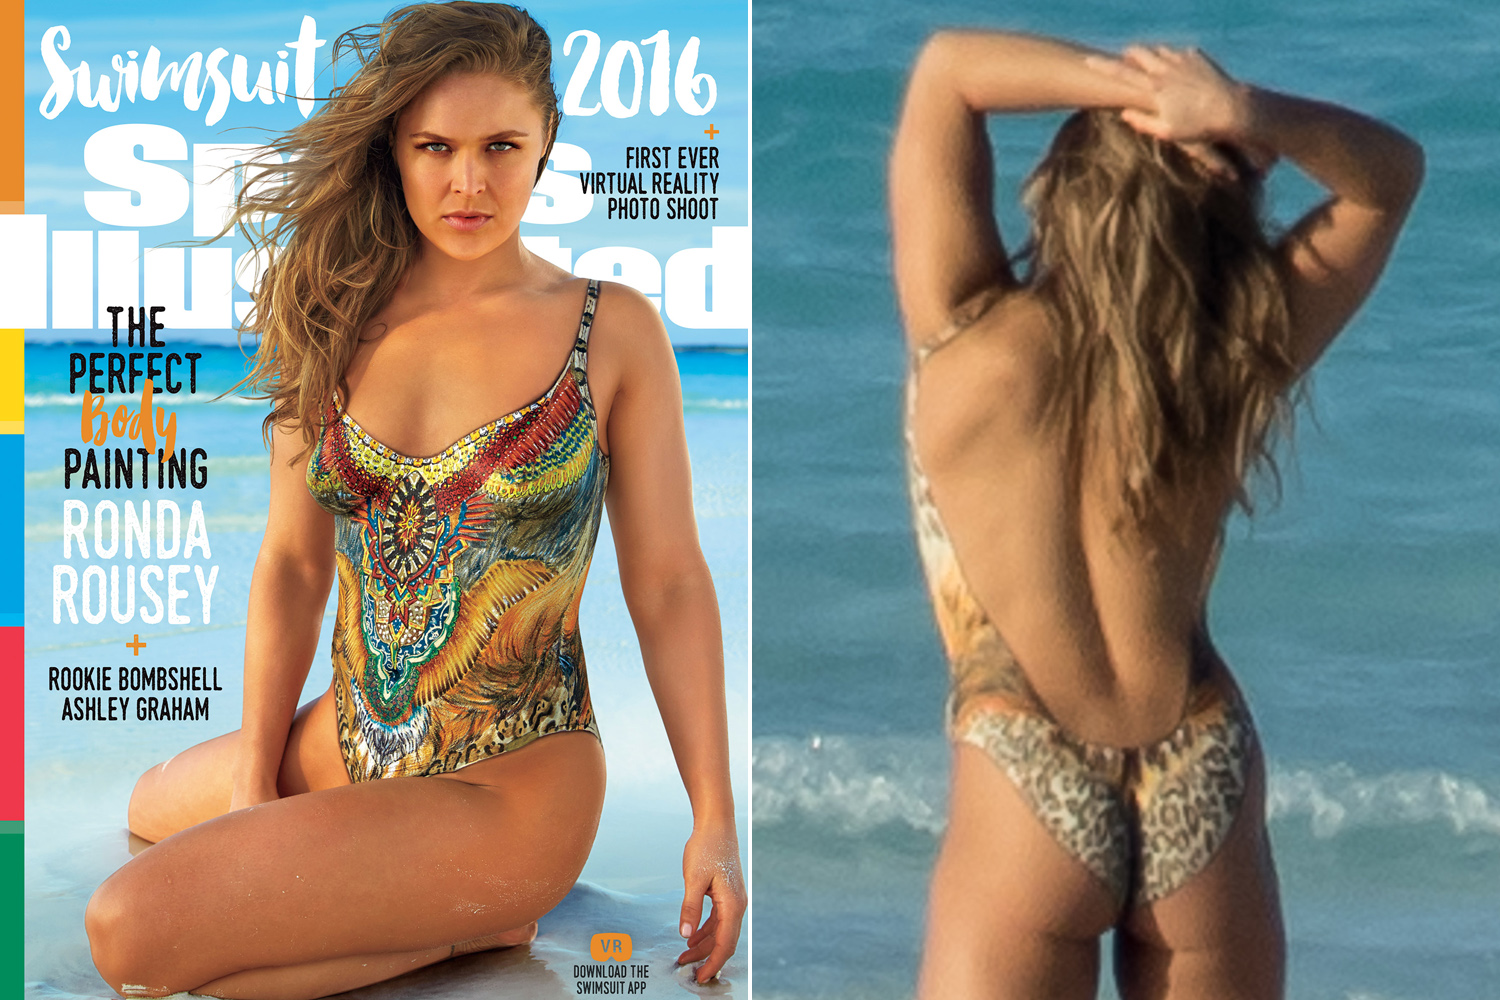 dave kidane recommends ronda rousey uncensored pics pic